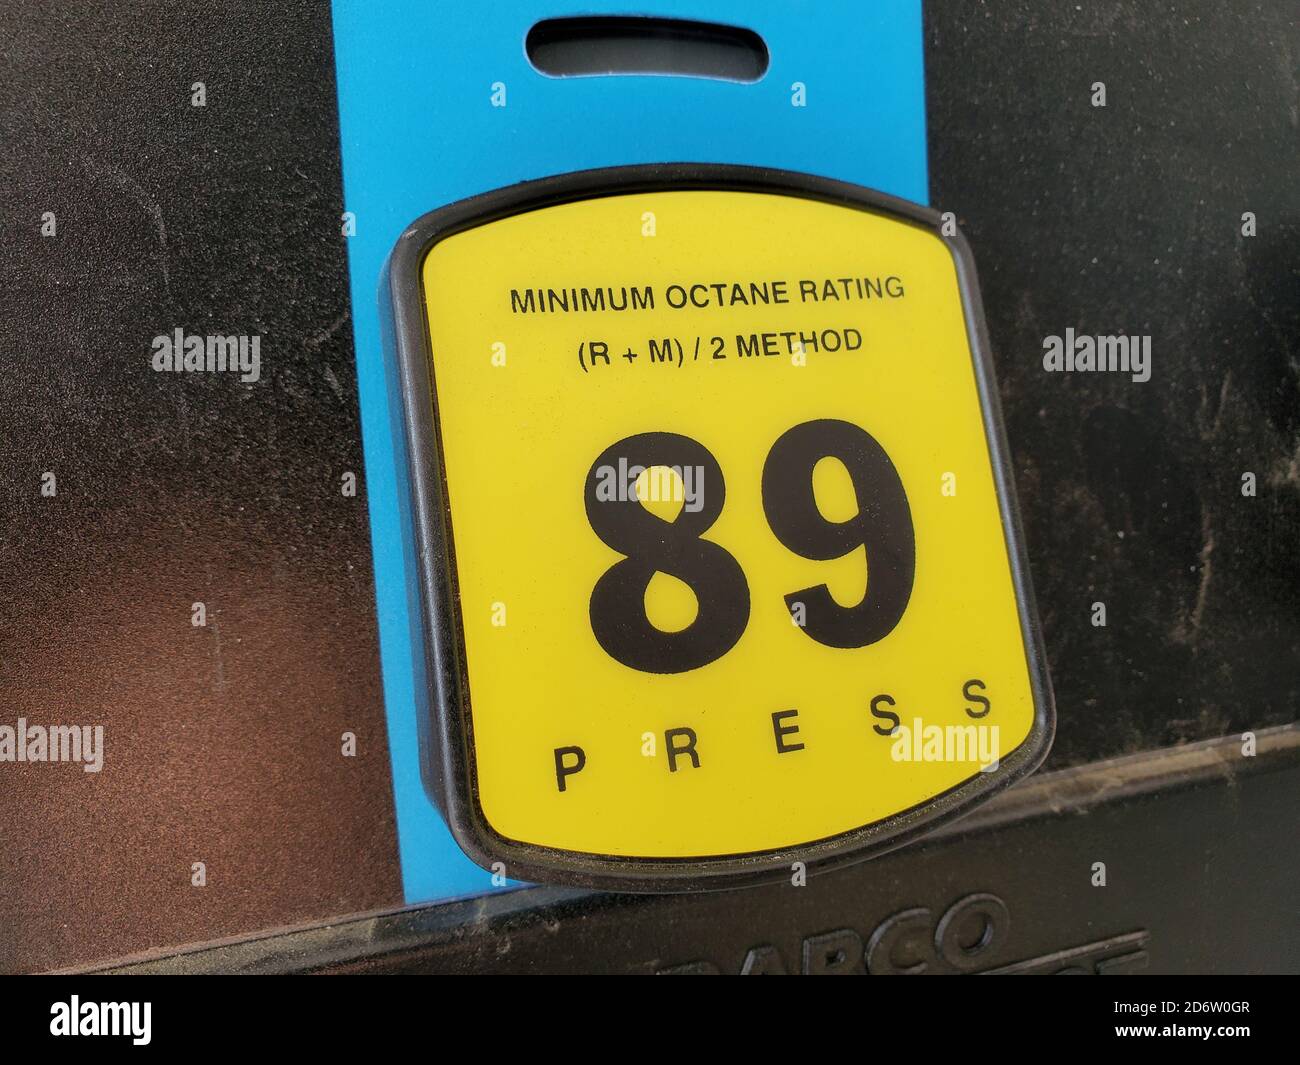 Close-up of octane rating of 89 octane for Plus gasoline on a fuel pump in a gas station setting, San Ramon, California, August 28, 2020. () Stock Photo